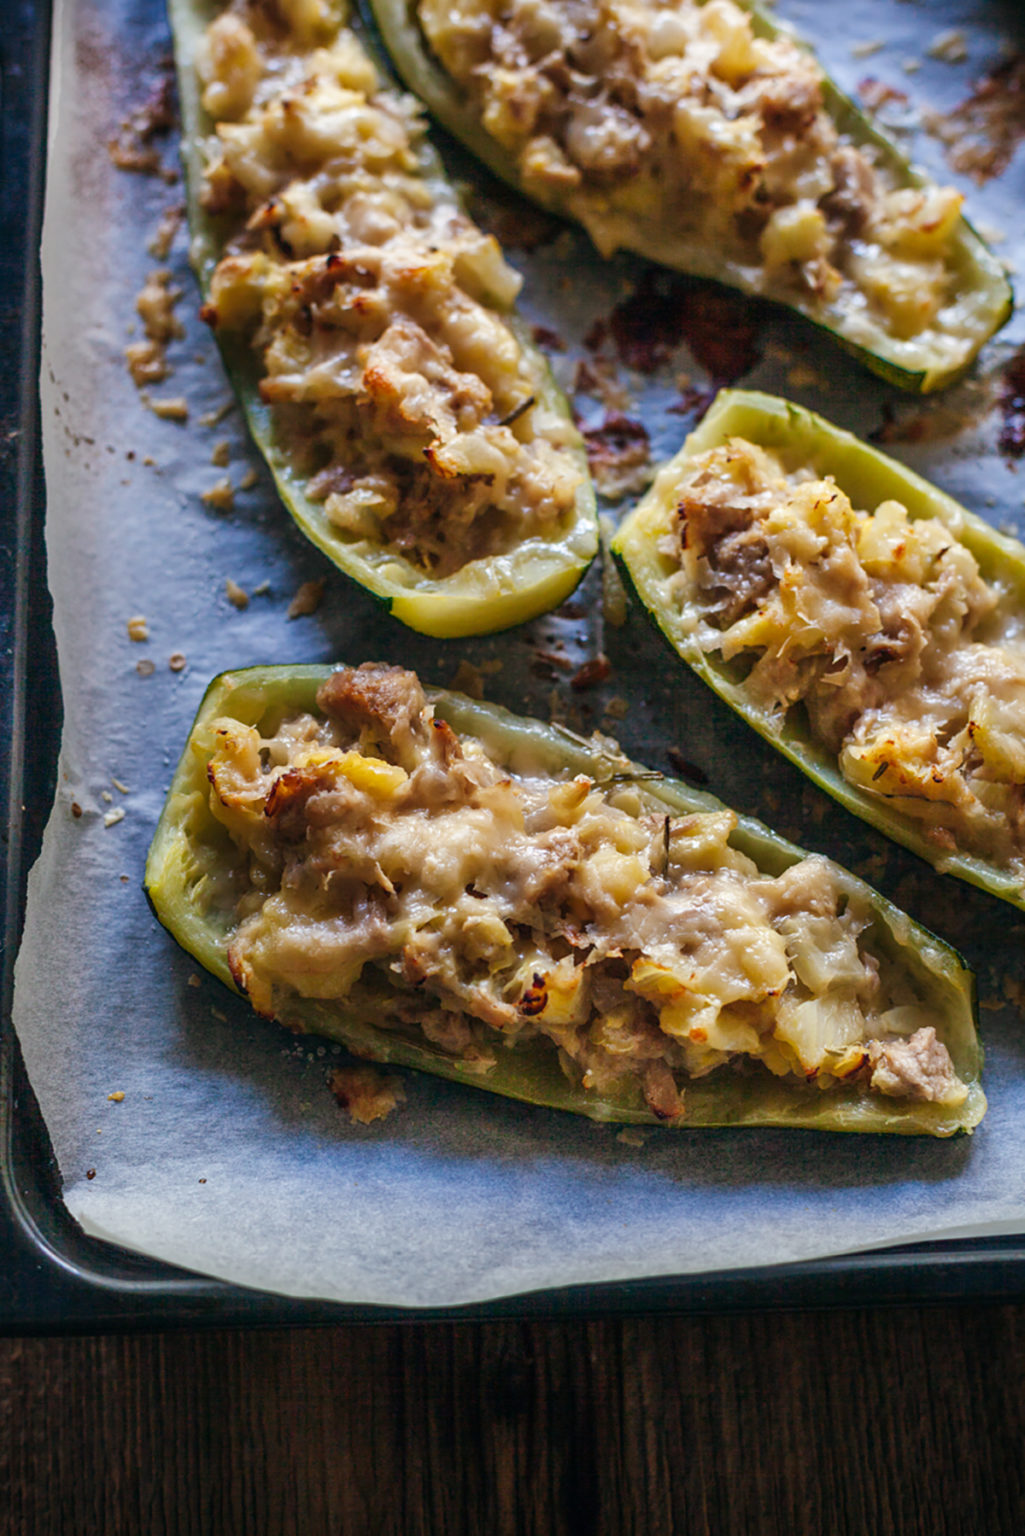 Tuna stuffed zucchini boats (light and delicious meal!)